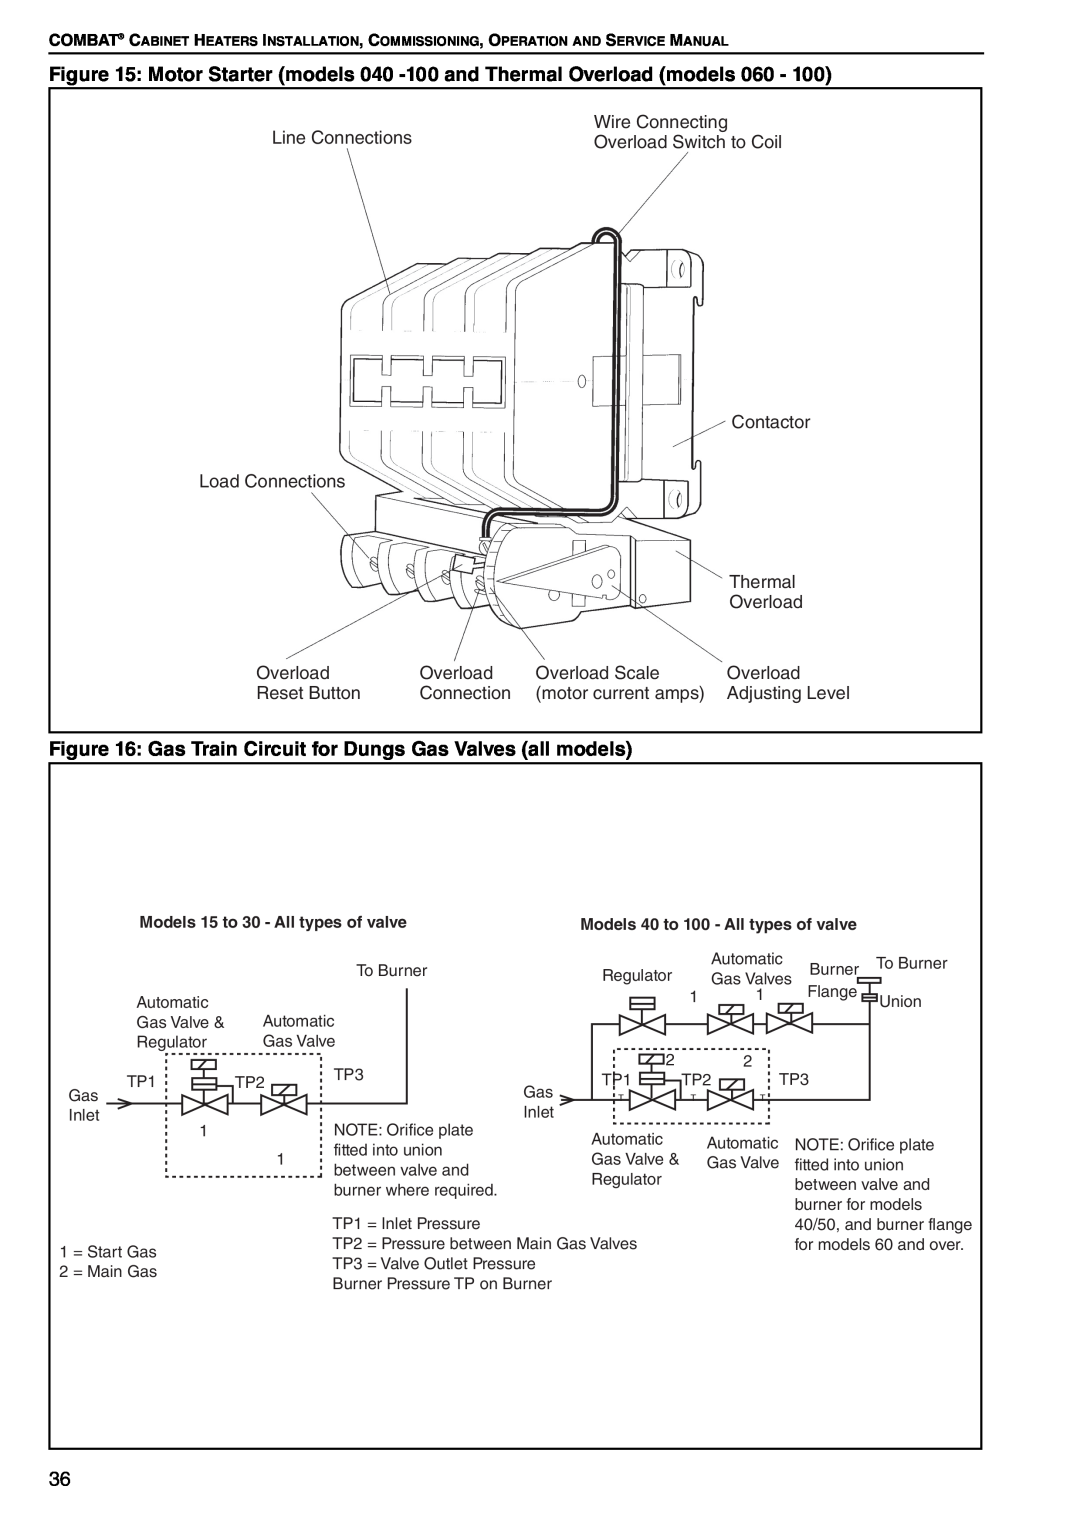 Roberts Gorden POP-ECA/PGP-ECA 015 to 0100 service manual Gas Train Circuit for Dungs Gas Valves all models 